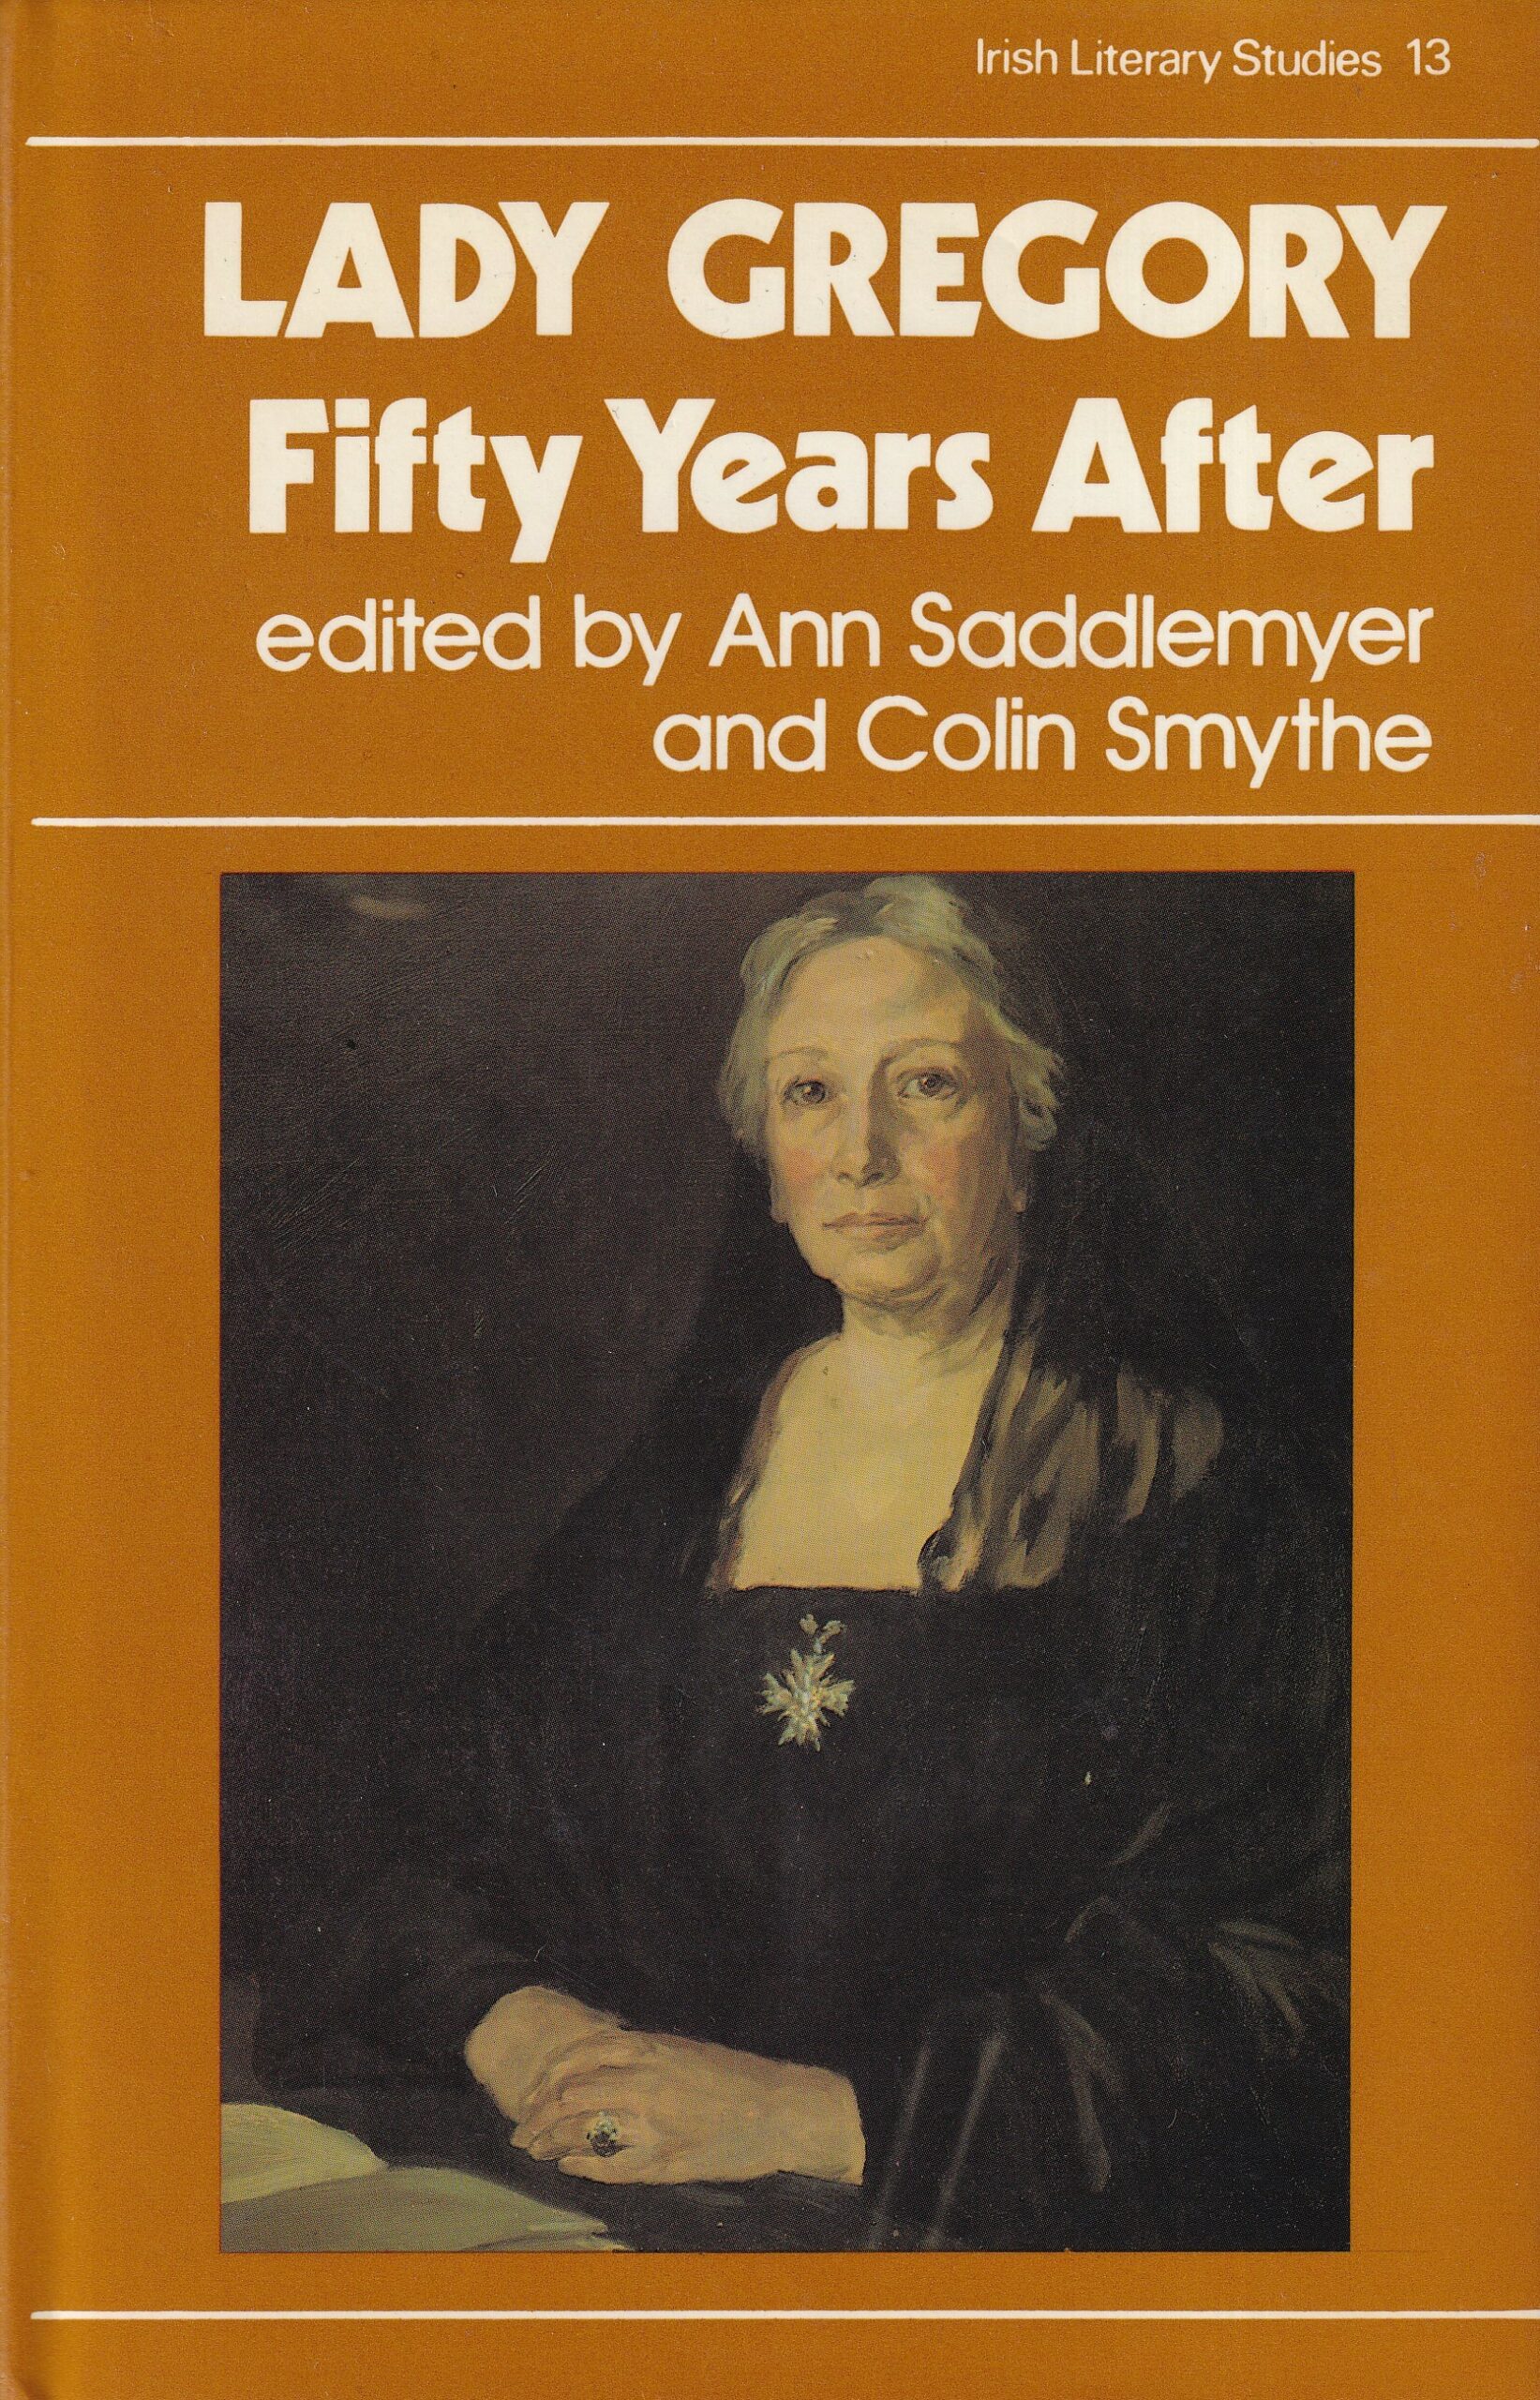 Lady Gregory Fifty Years After | Ann Saddlemyer and Colin Smythe (eds.) | Charlie Byrne's